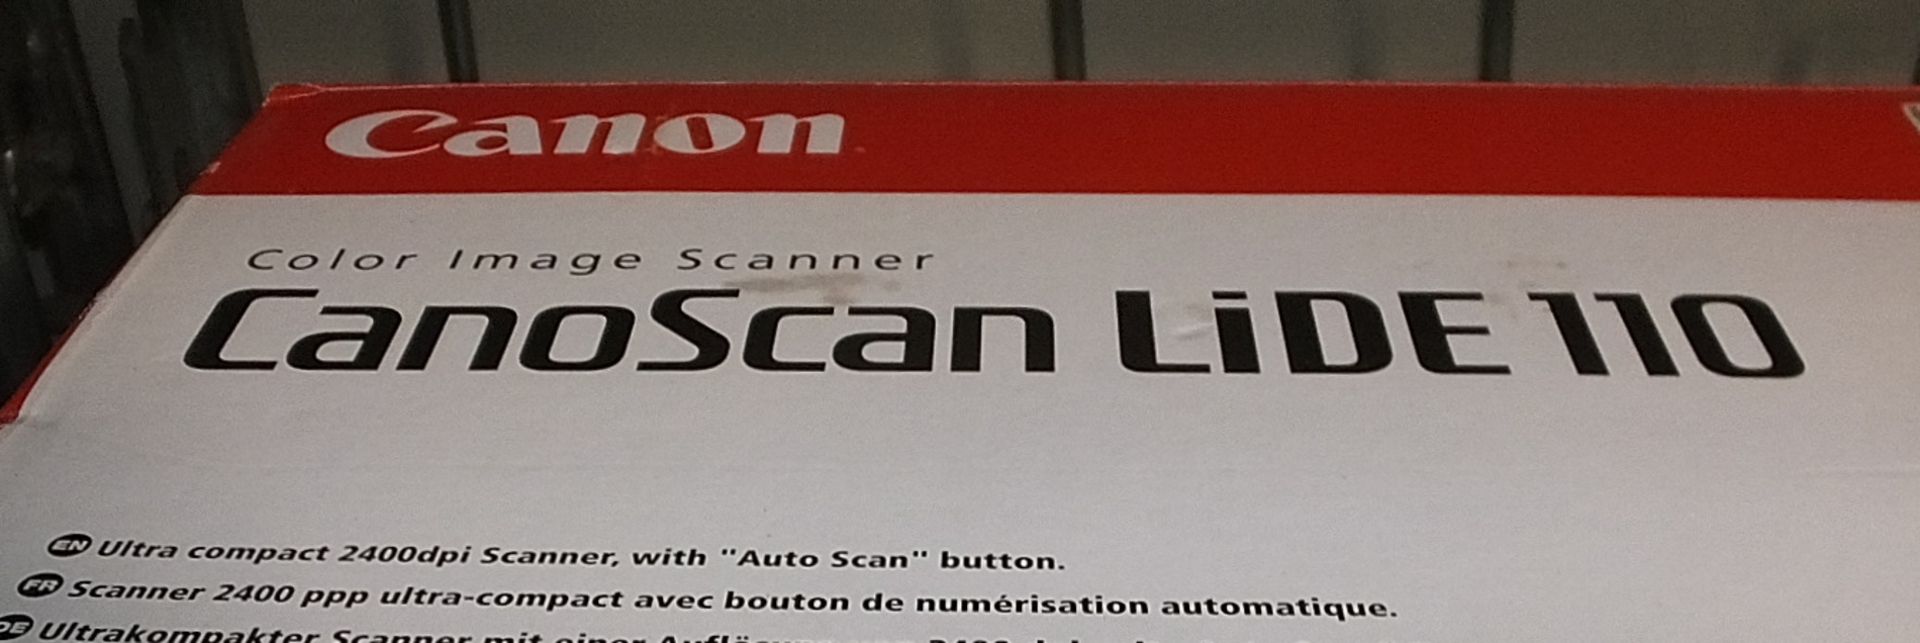 Canon Canoscan Lide110 Color Image Scanner - Image 3 of 3